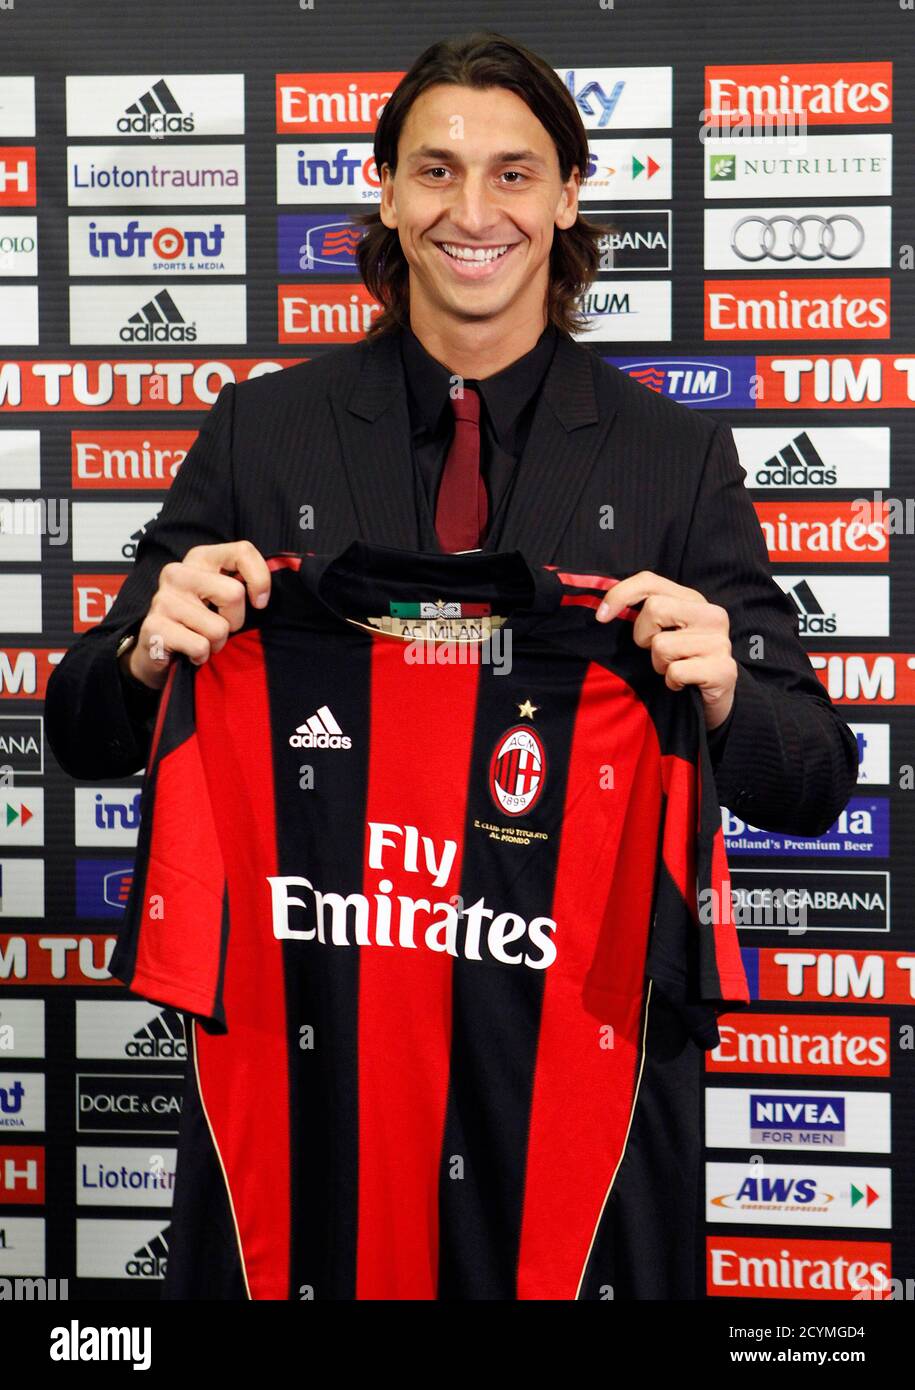 AC Milan's new signing Zlatan Ibrahimovic holds a jersey during a  presentation downtown Milan September 9, 2010. AC Milan could unleash the  full force of their fearsome frontline foursome, which includes Ibrahimovic,